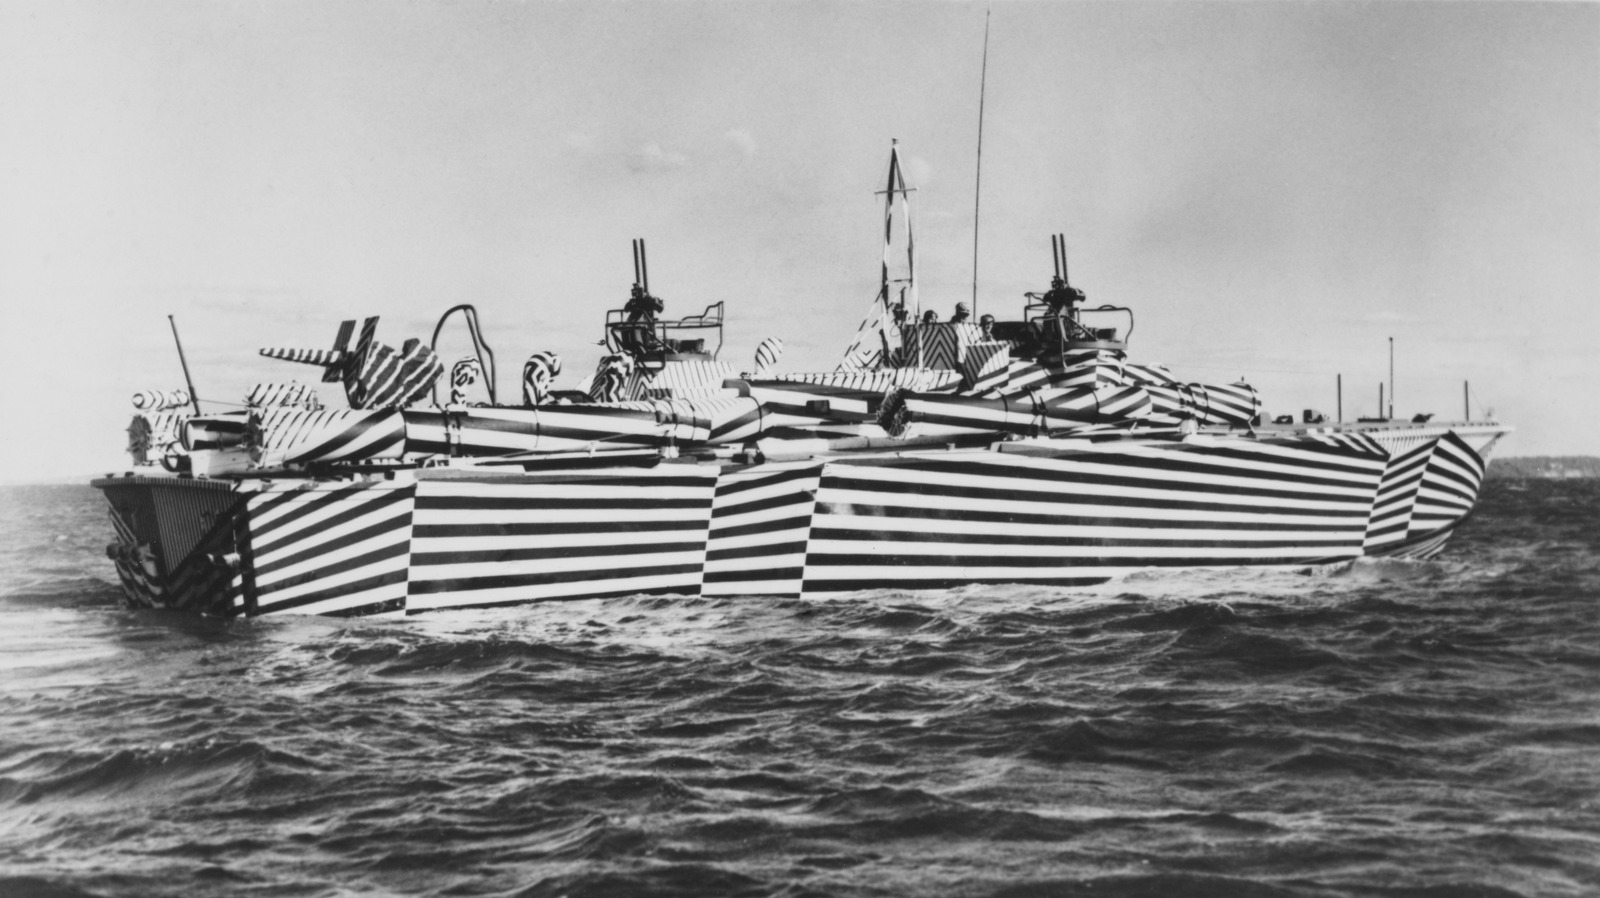 Three Unusual Camouflage Patterns Used By WWI Naval Vessels